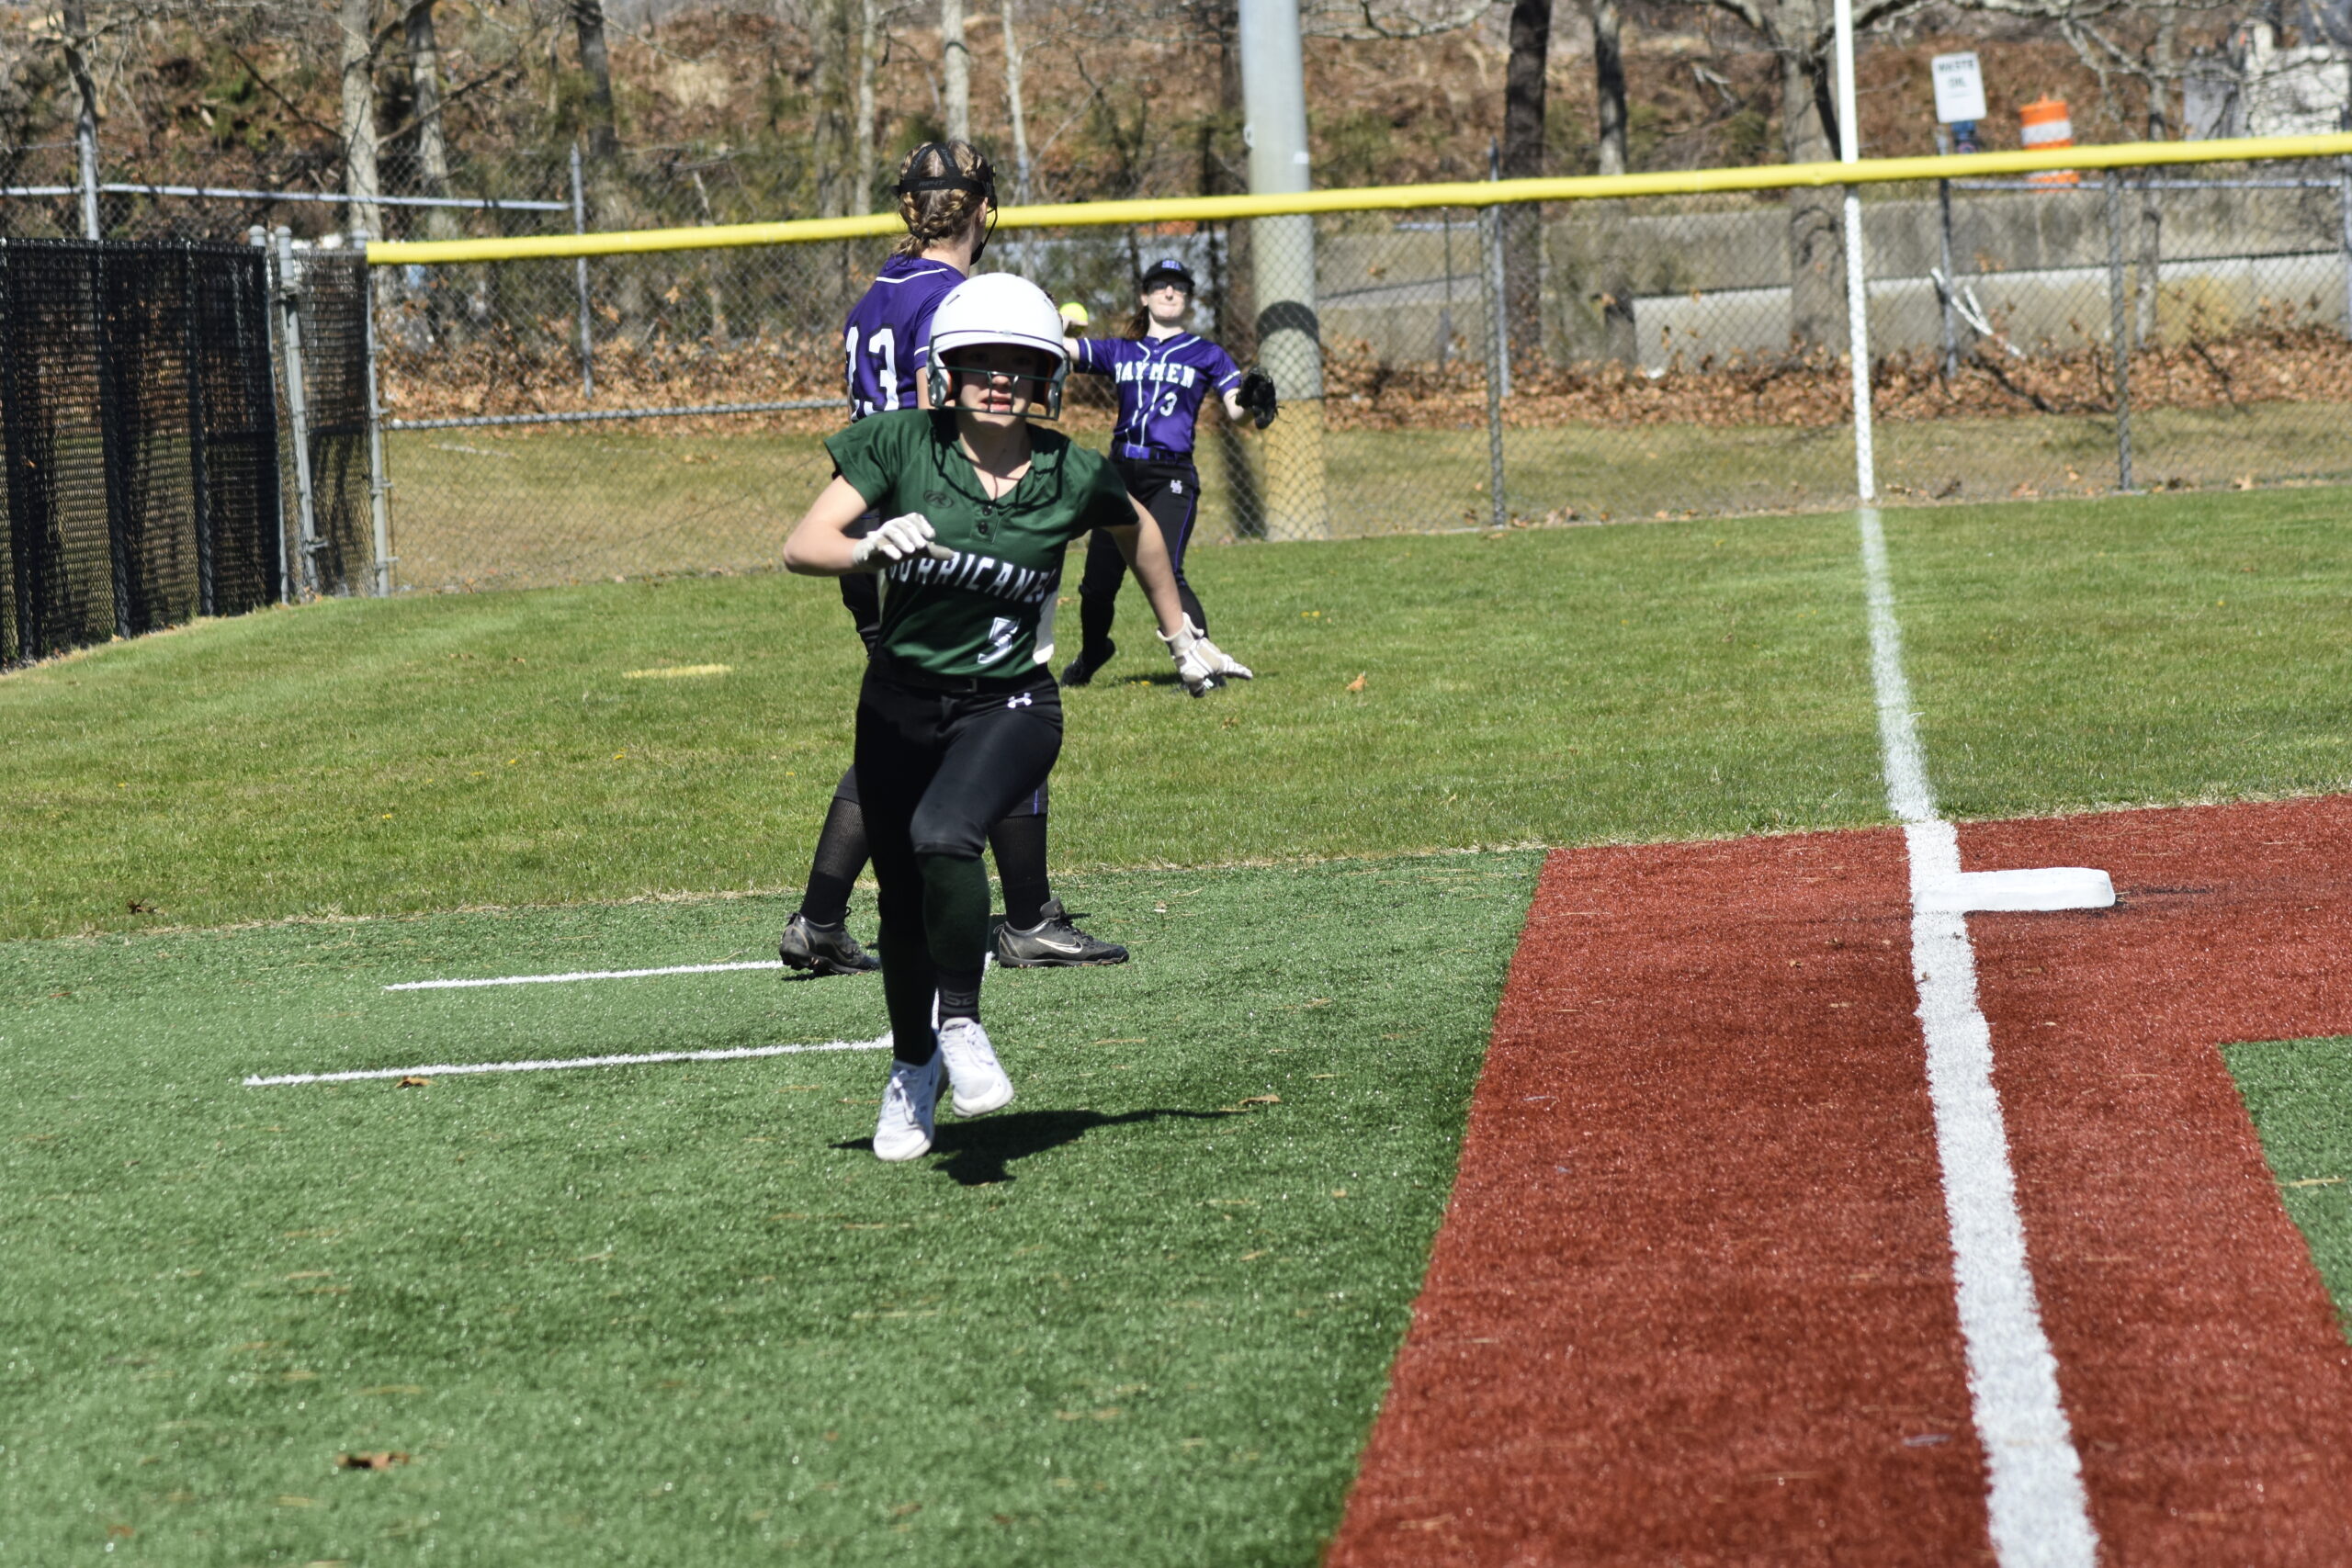 Ashley Erbis rounds third and scores the first run of the game in a 12-0 victory over Hampton Bays at Red Creek Park this past Friday.    DREW BUDD